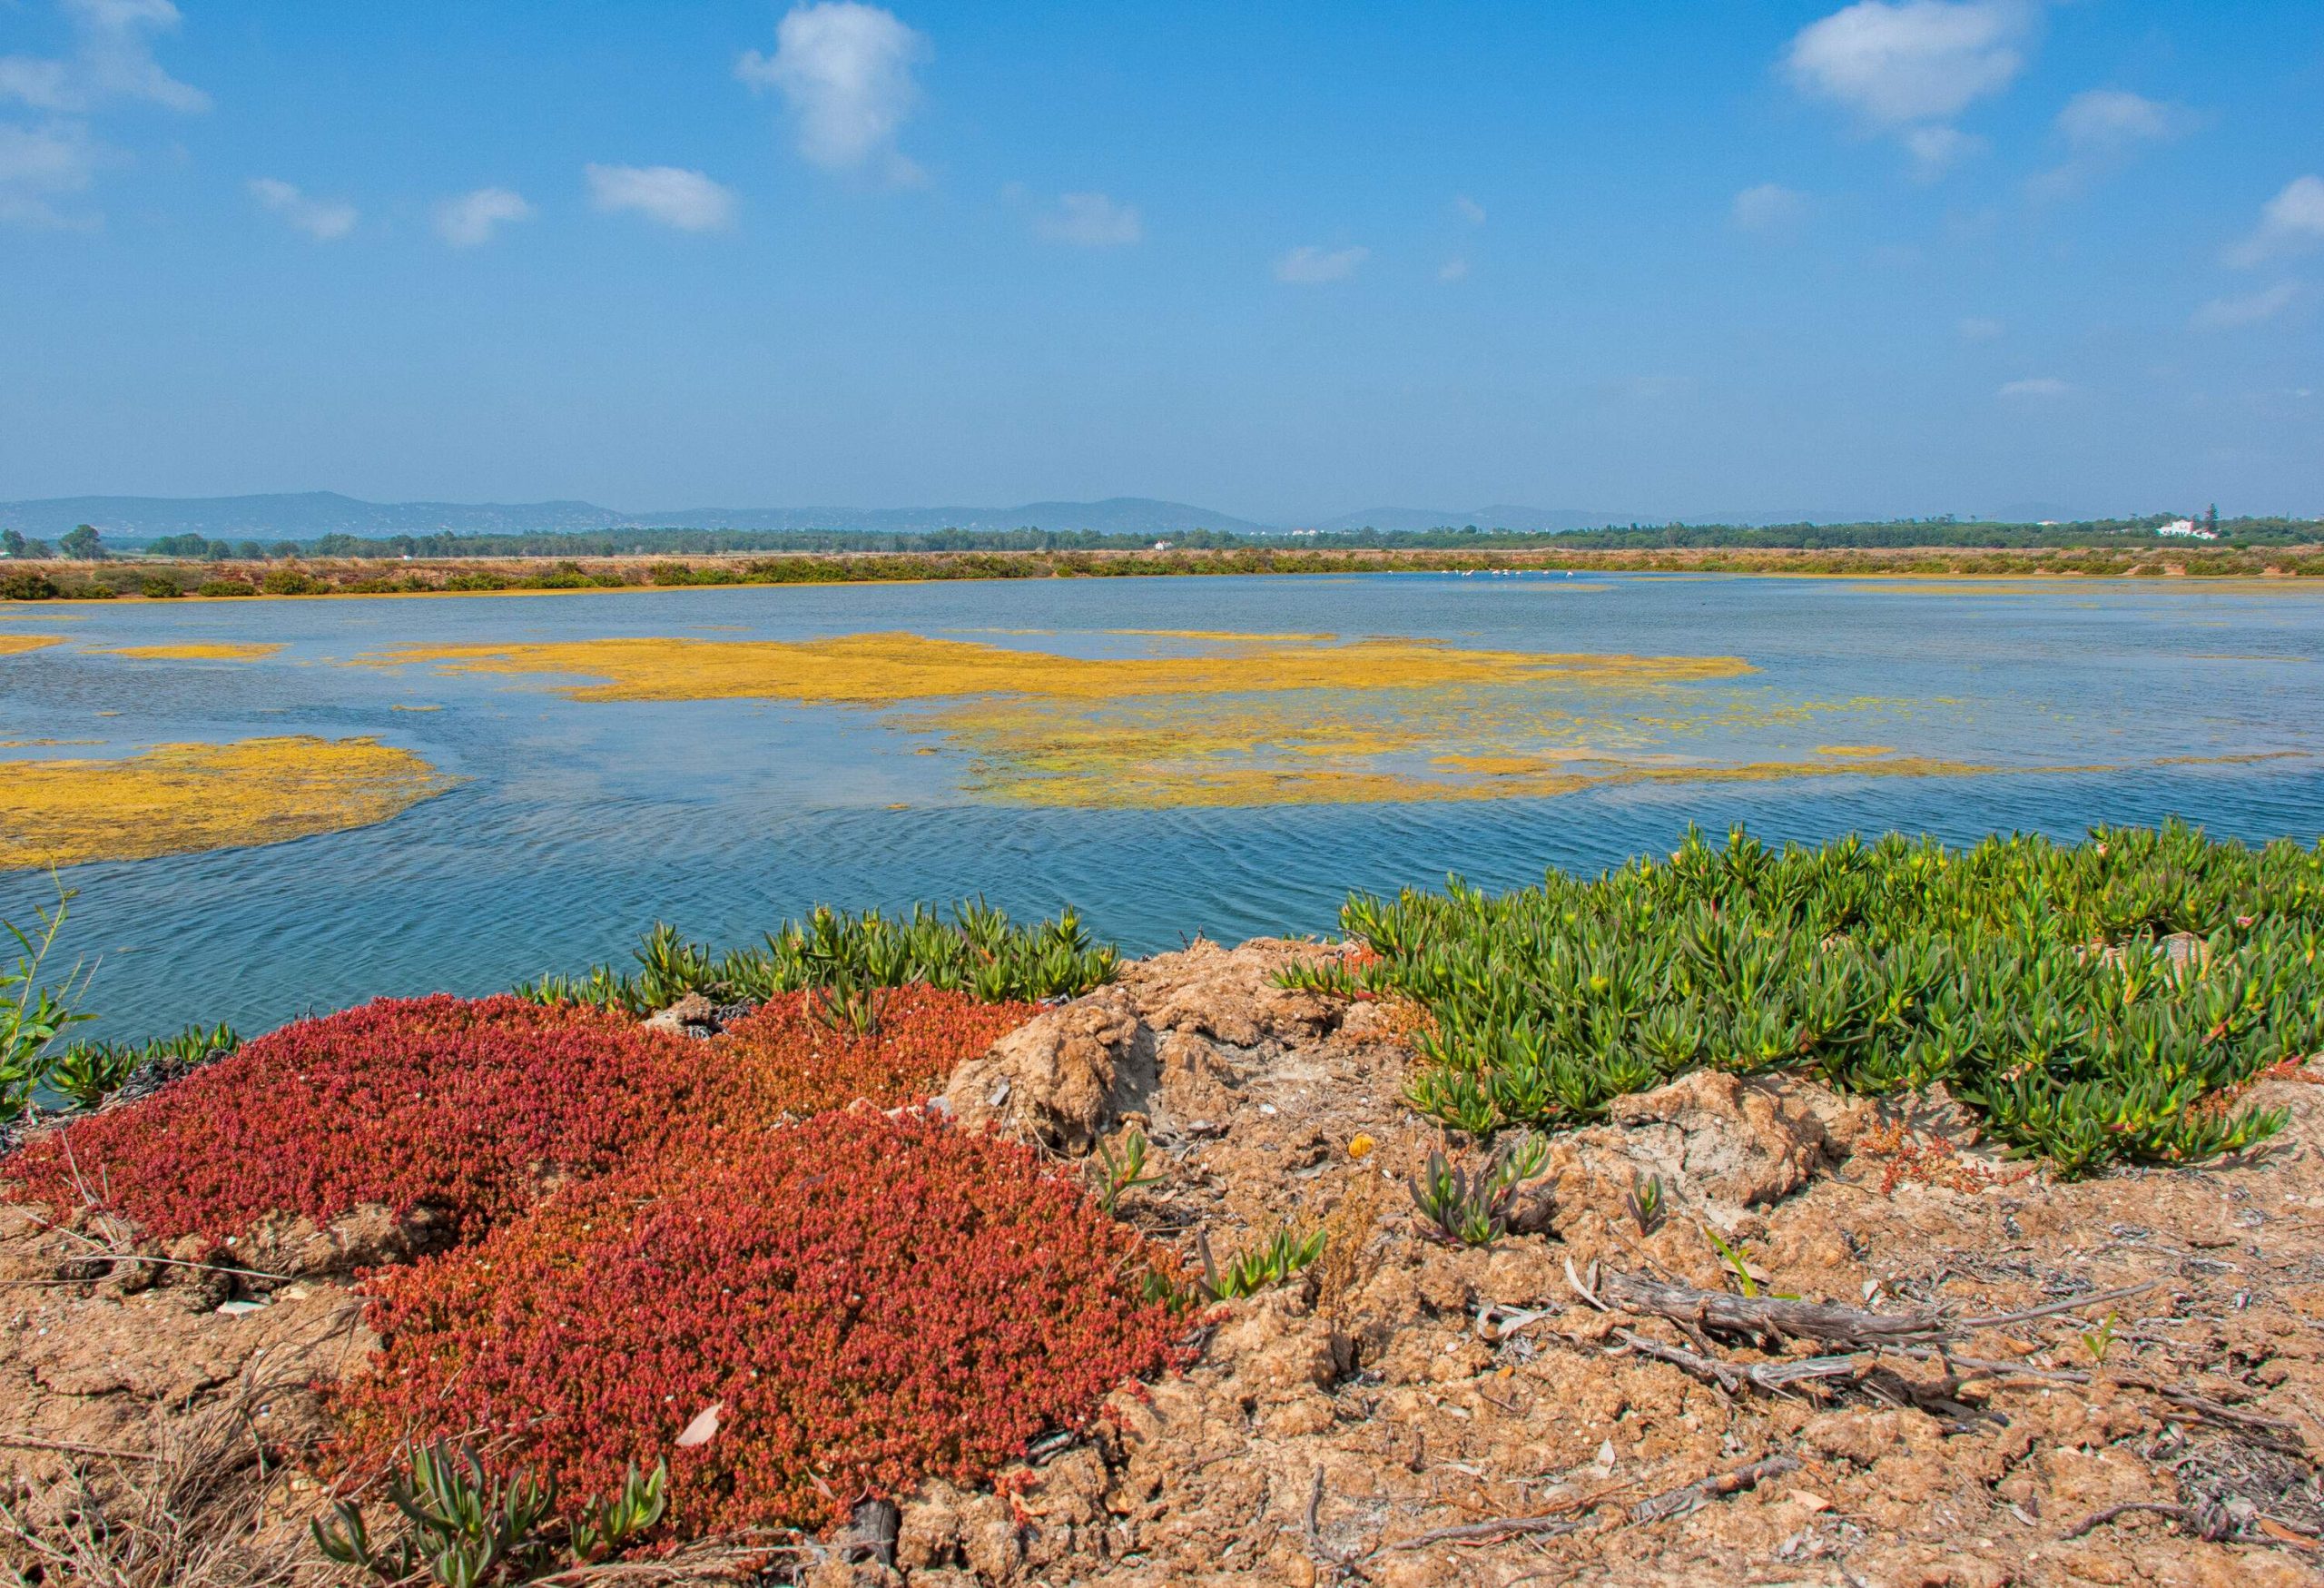 A marshland with plants growing on the rugged terrain surrounding it.